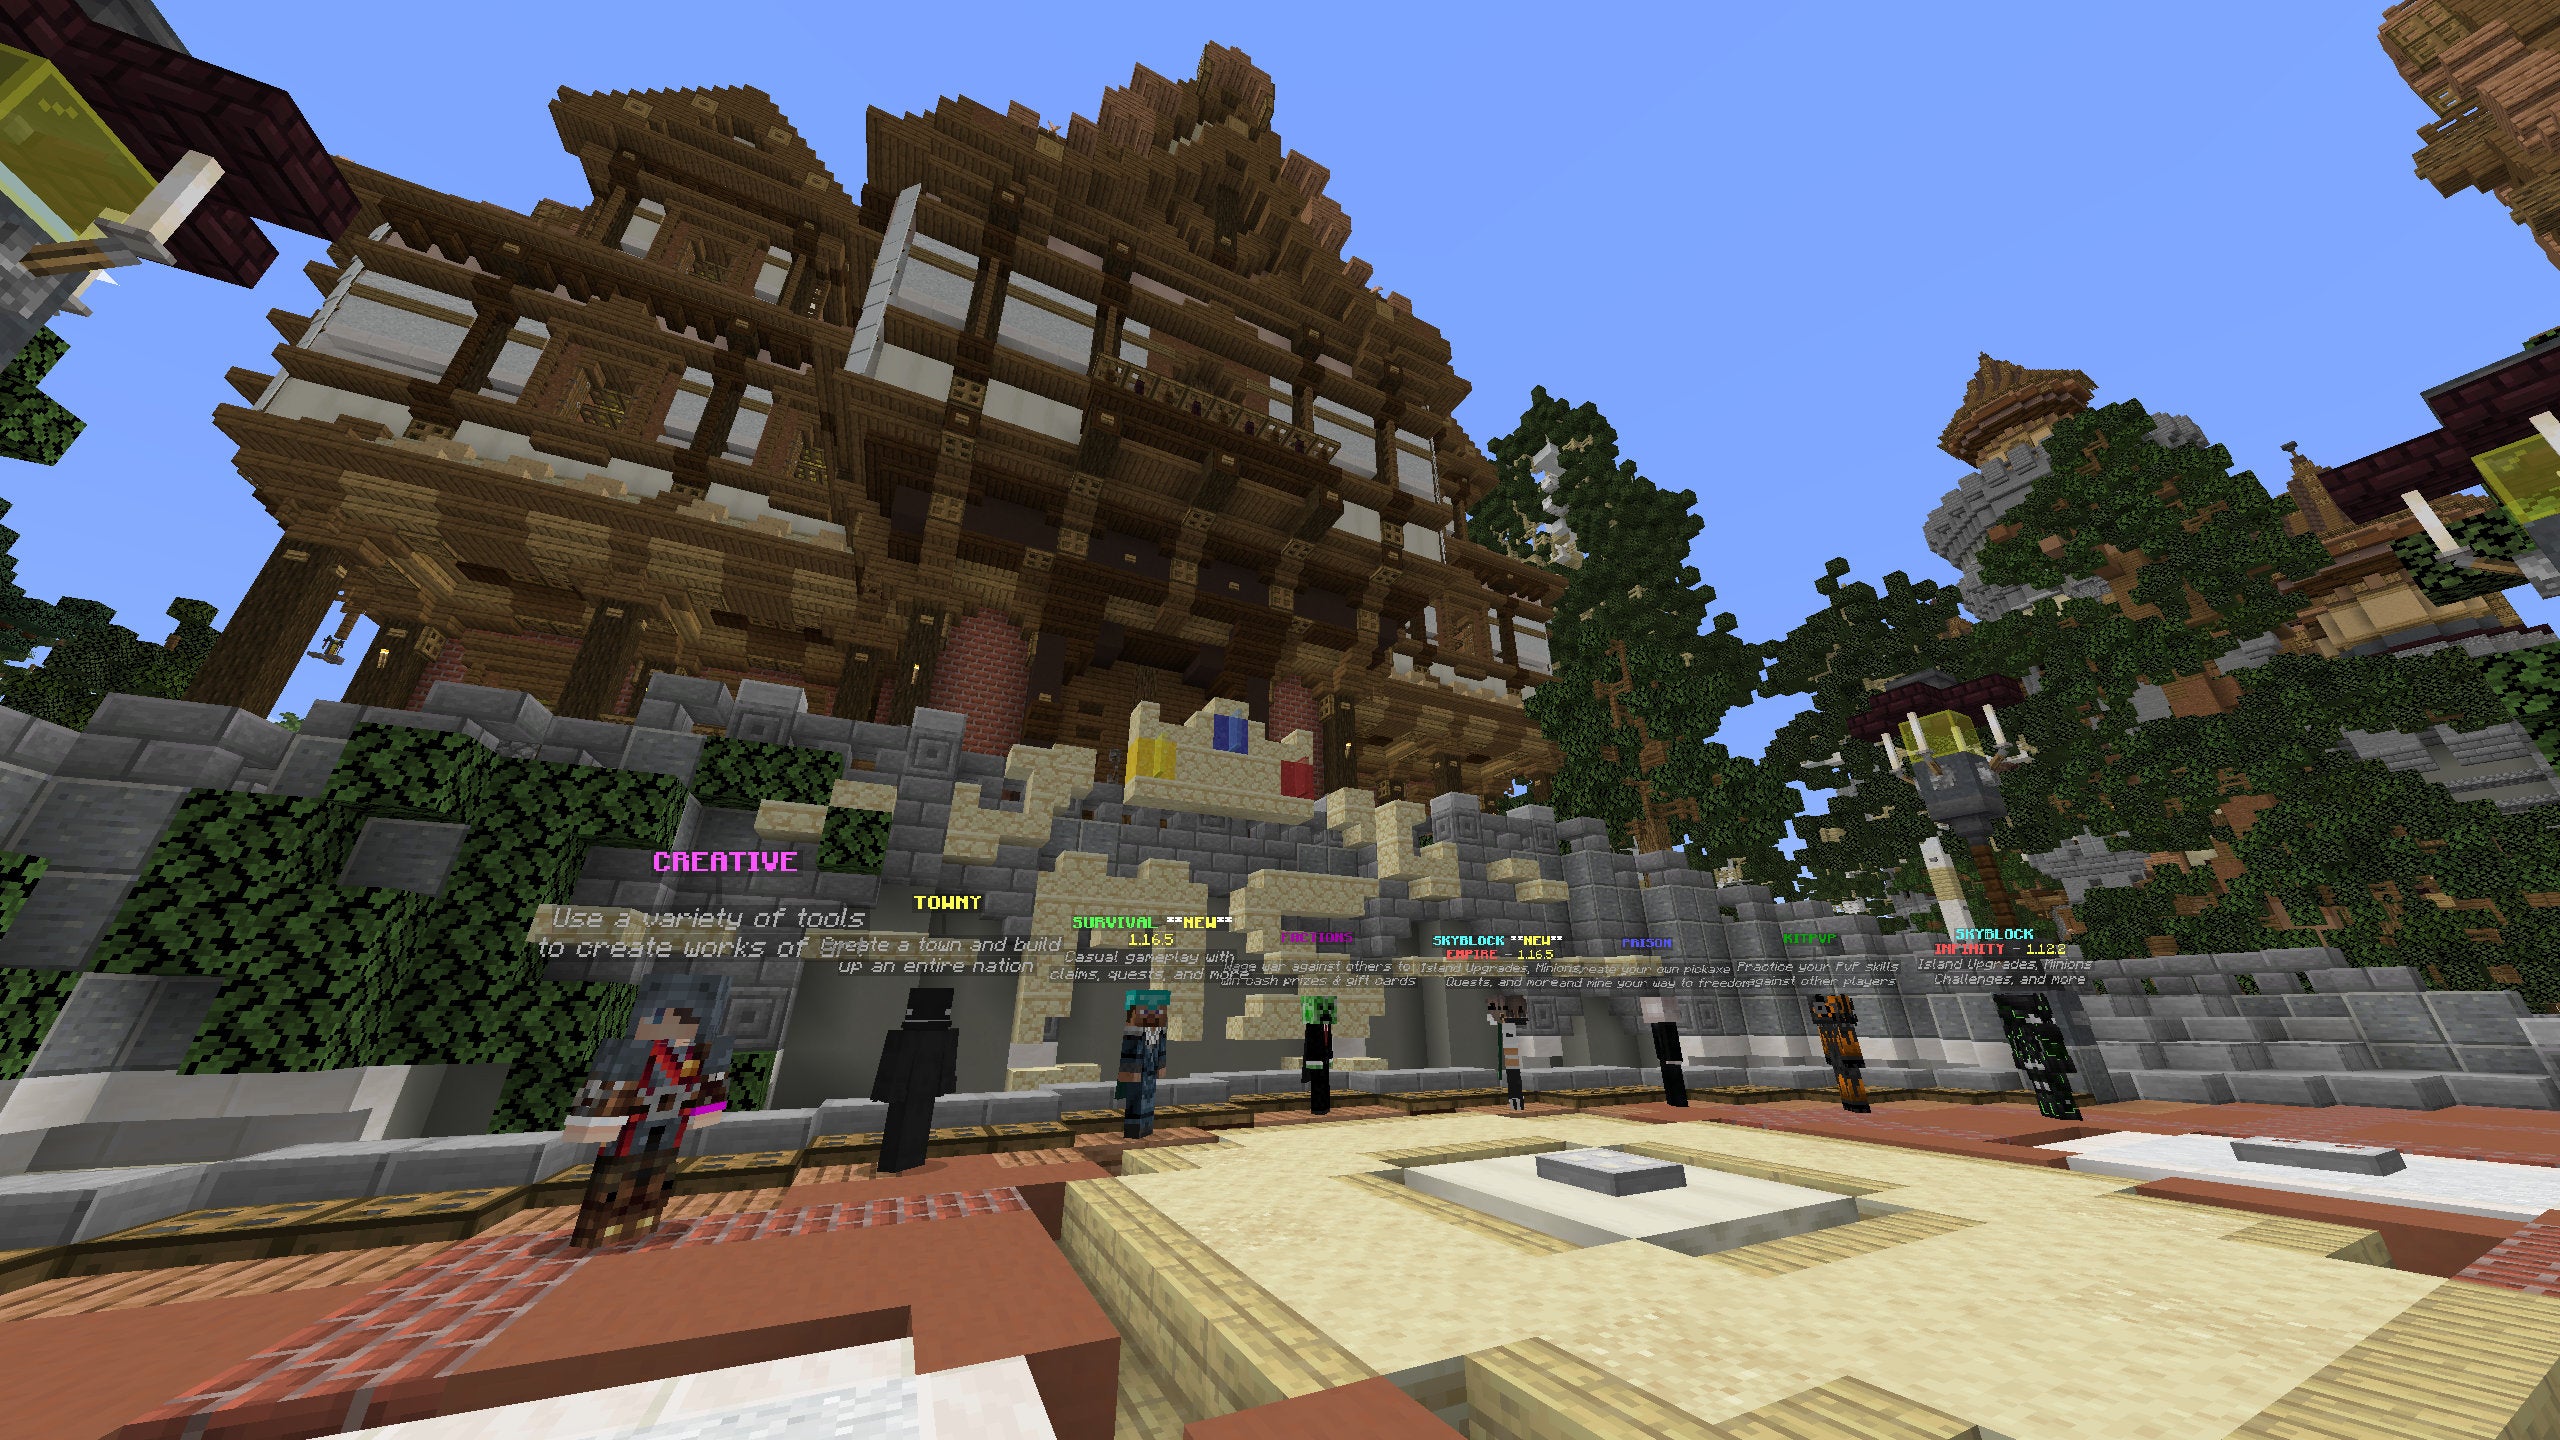 A Minecraft screenshot of the lobby of the MineSuperior server.